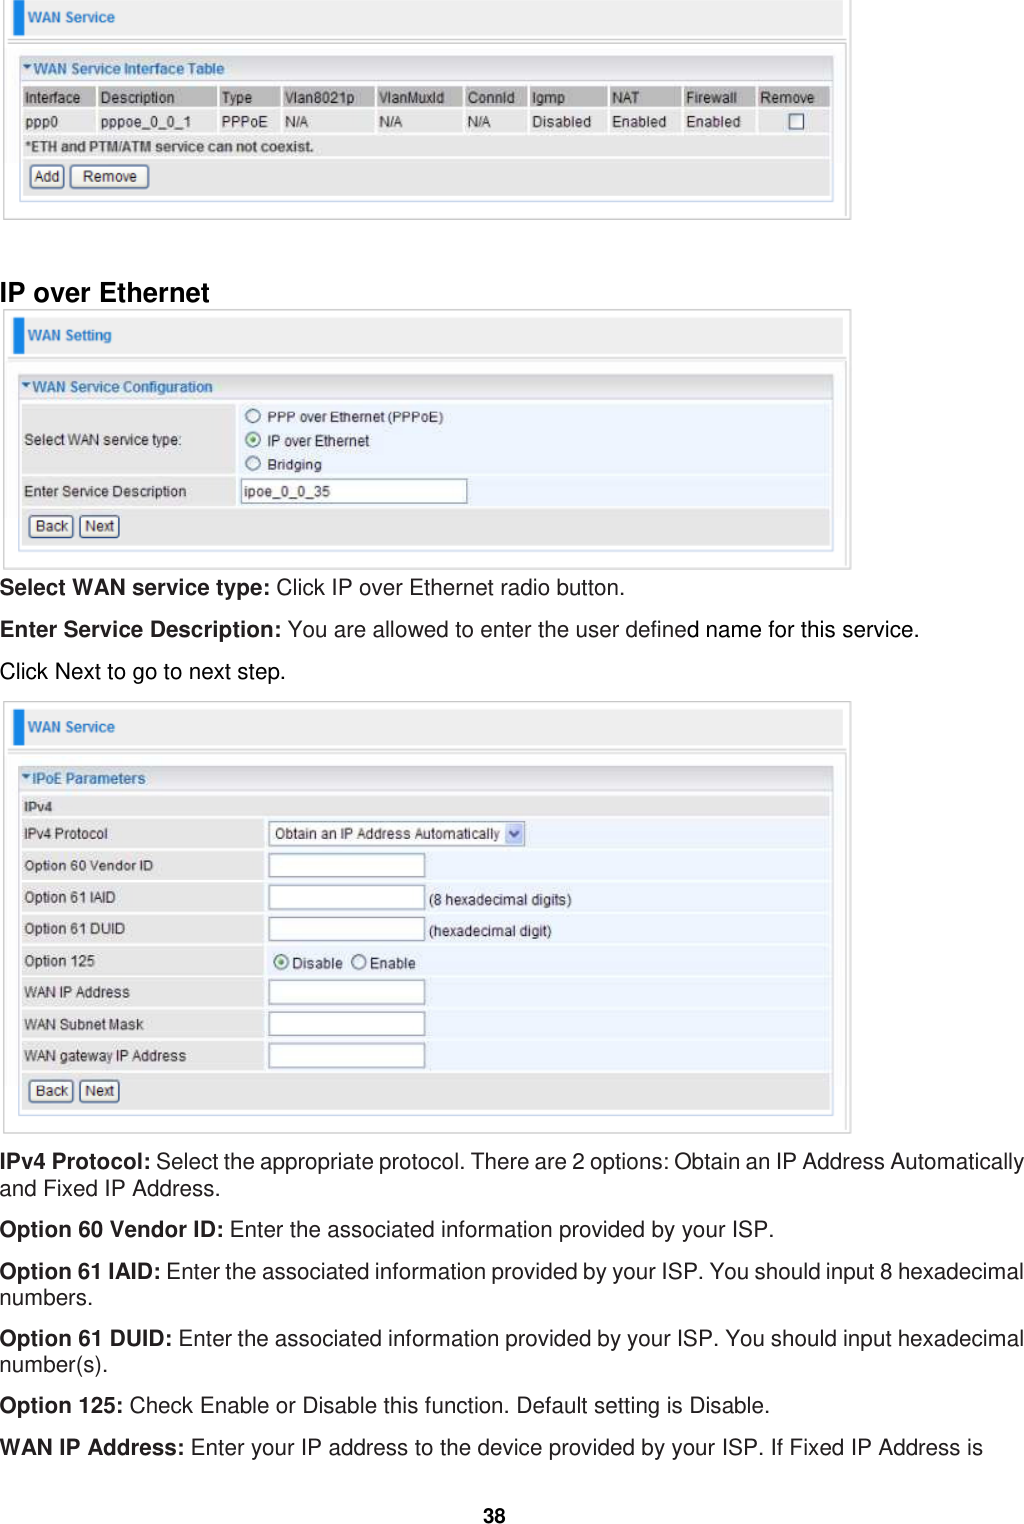  38   IP over Ethernet  Select WAN service type: Click IP over Ethernet radio button. Enter Service Description: You are allowed to enter the user defined name for this service. Click Next to go to next step.  IPv4 Protocol: Select the appropriate protocol. There are 2 options: Obtain an IP Address Automatically and Fixed IP Address. Option 60 Vendor ID: Enter the associated information provided by your ISP.  Option 61 IAID: Enter the associated information provided by your ISP. You should input 8 hexadecimal numbers. Option 61 DUID: Enter the associated information provided by your ISP. You should input hexadecimal number(s). Option 125: Check Enable or Disable this function. Default setting is Disable. WAN IP Address: Enter your IP address to the device provided by your ISP. If Fixed IP Address is 